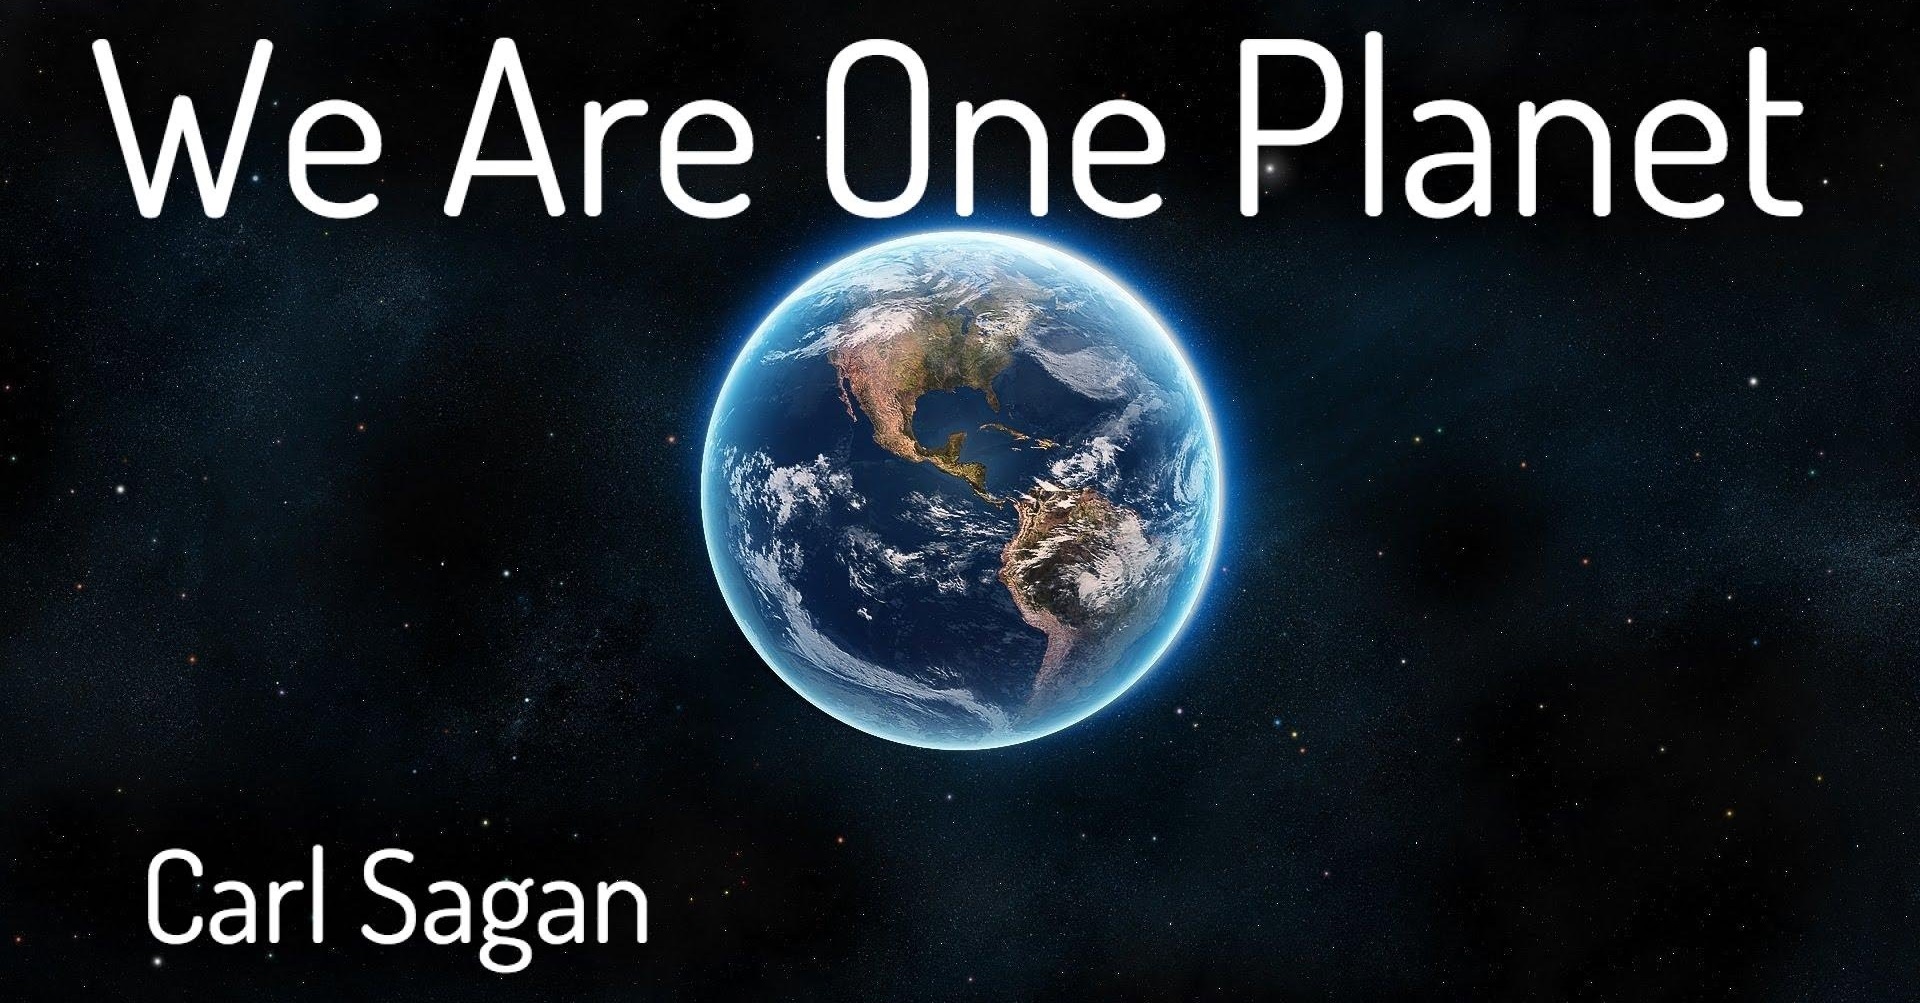 We are the Planet. We only get one Planet. Planet first